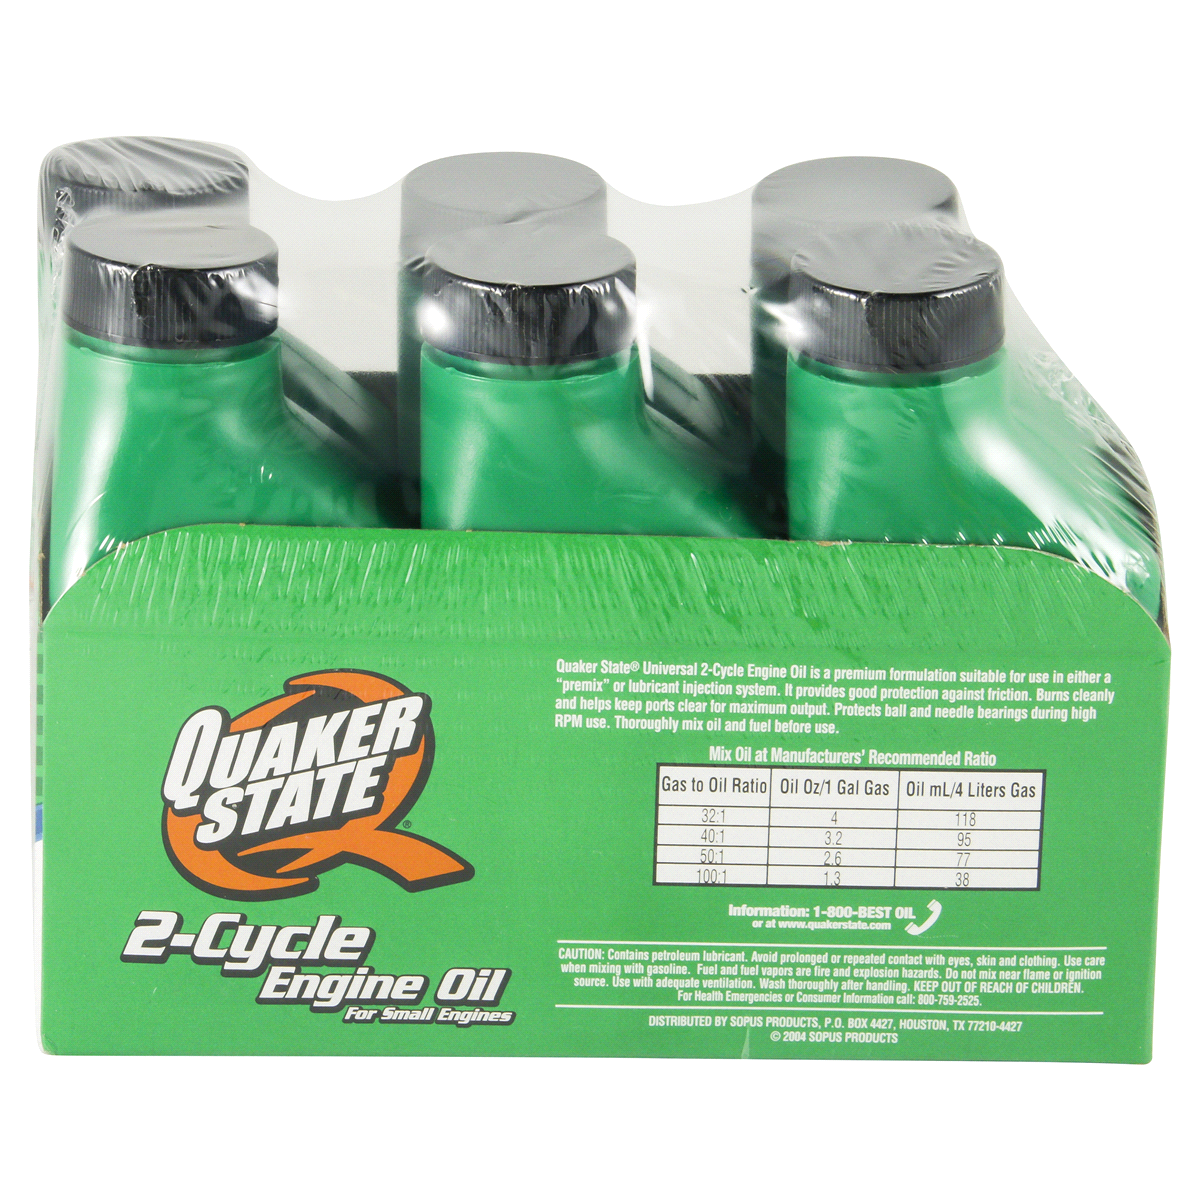 slide 2 of 3, Quaker State Universal 2-Cycle Engine Oil, 3.2 oz